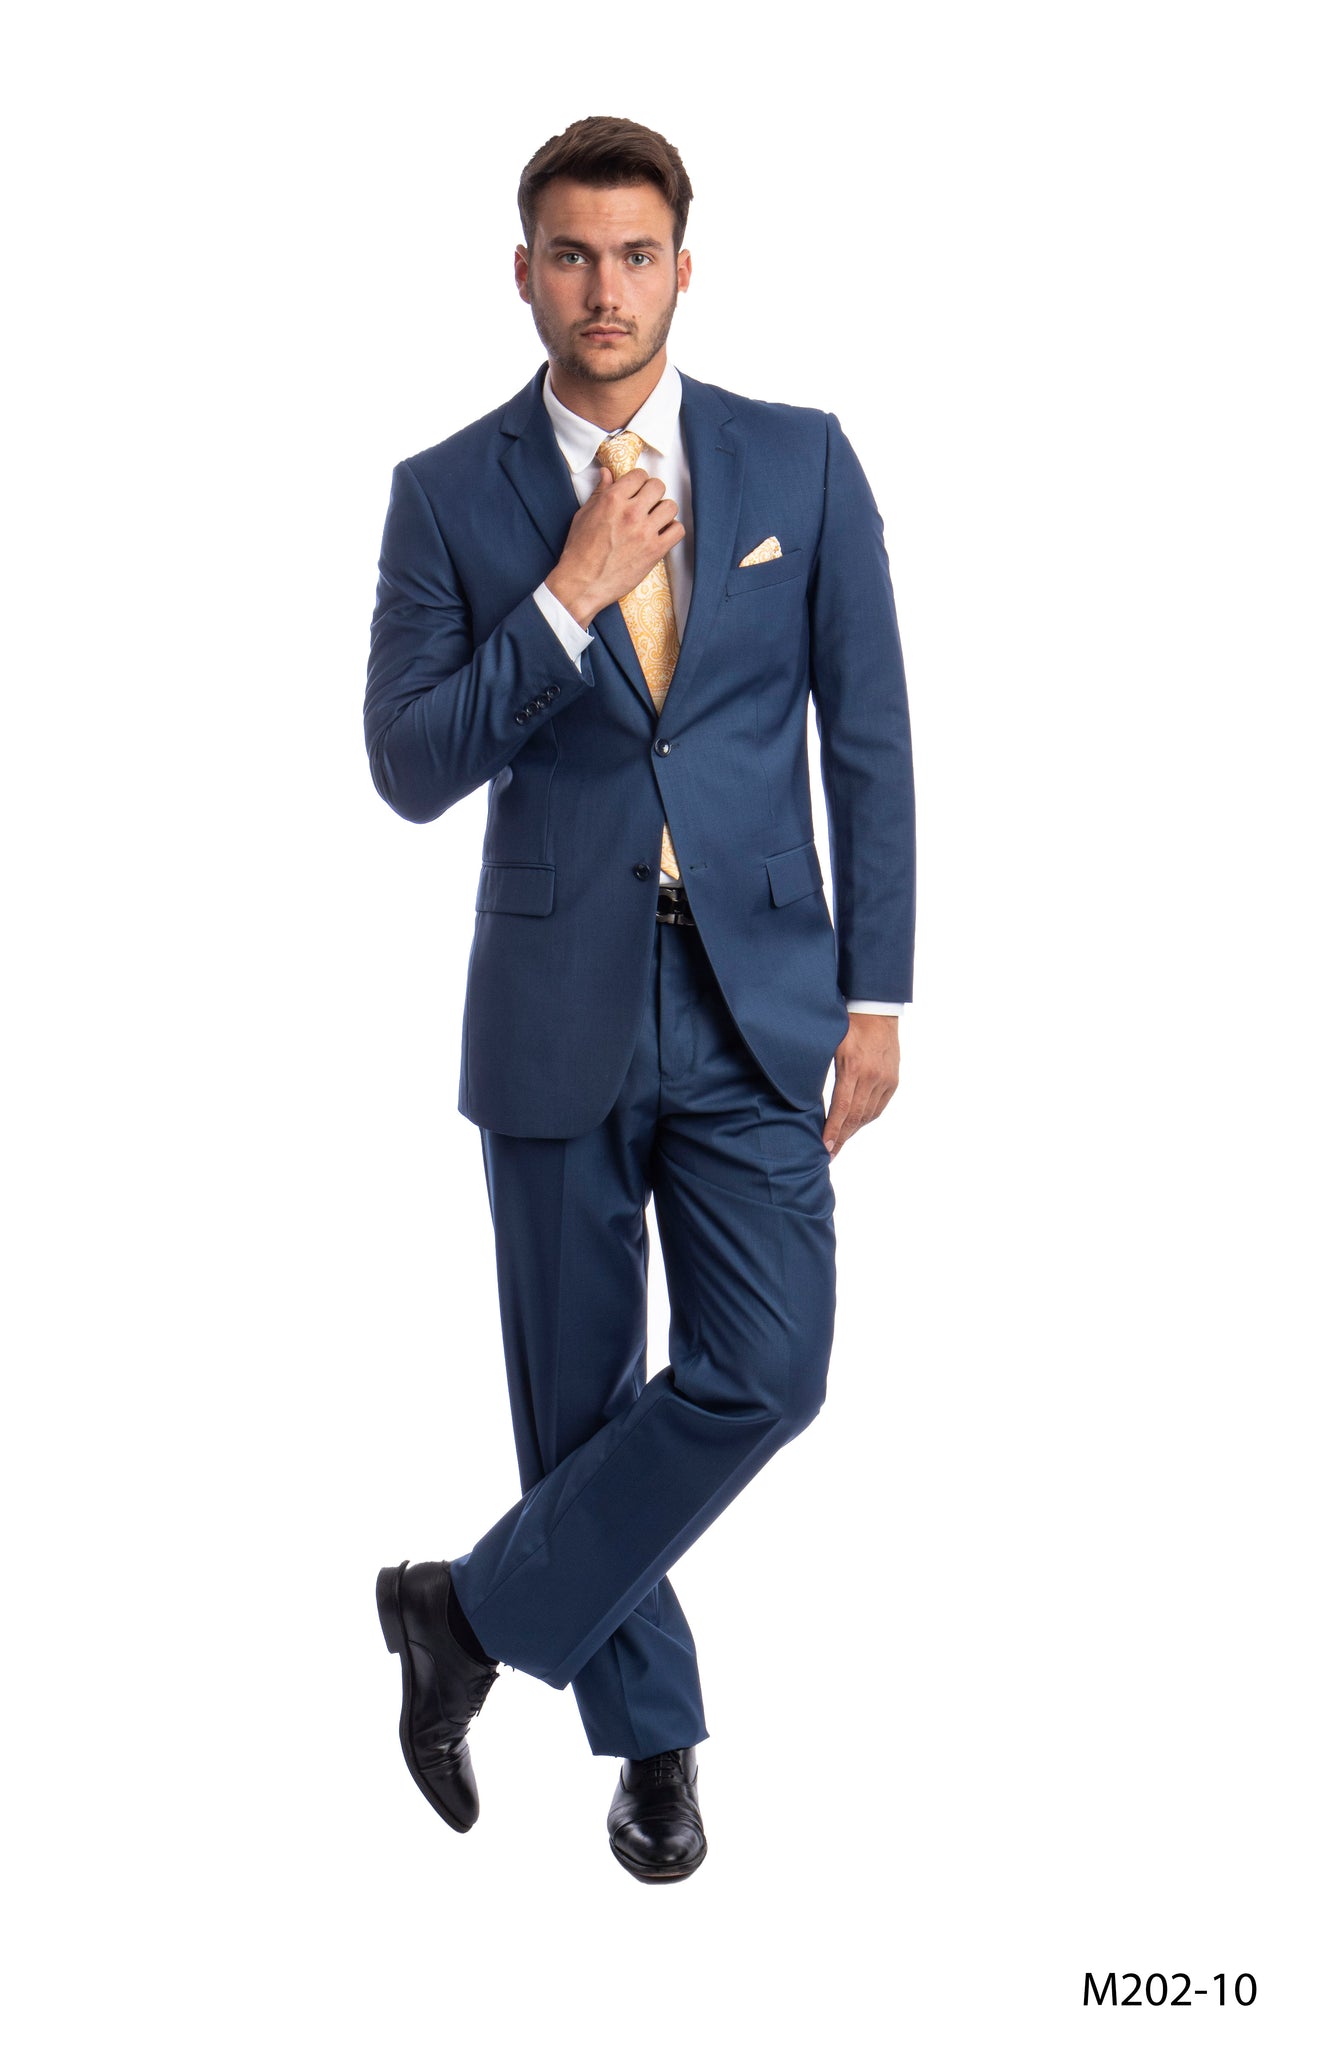 Indigo Blue Suit For Men Formal Suits For All Ocassions